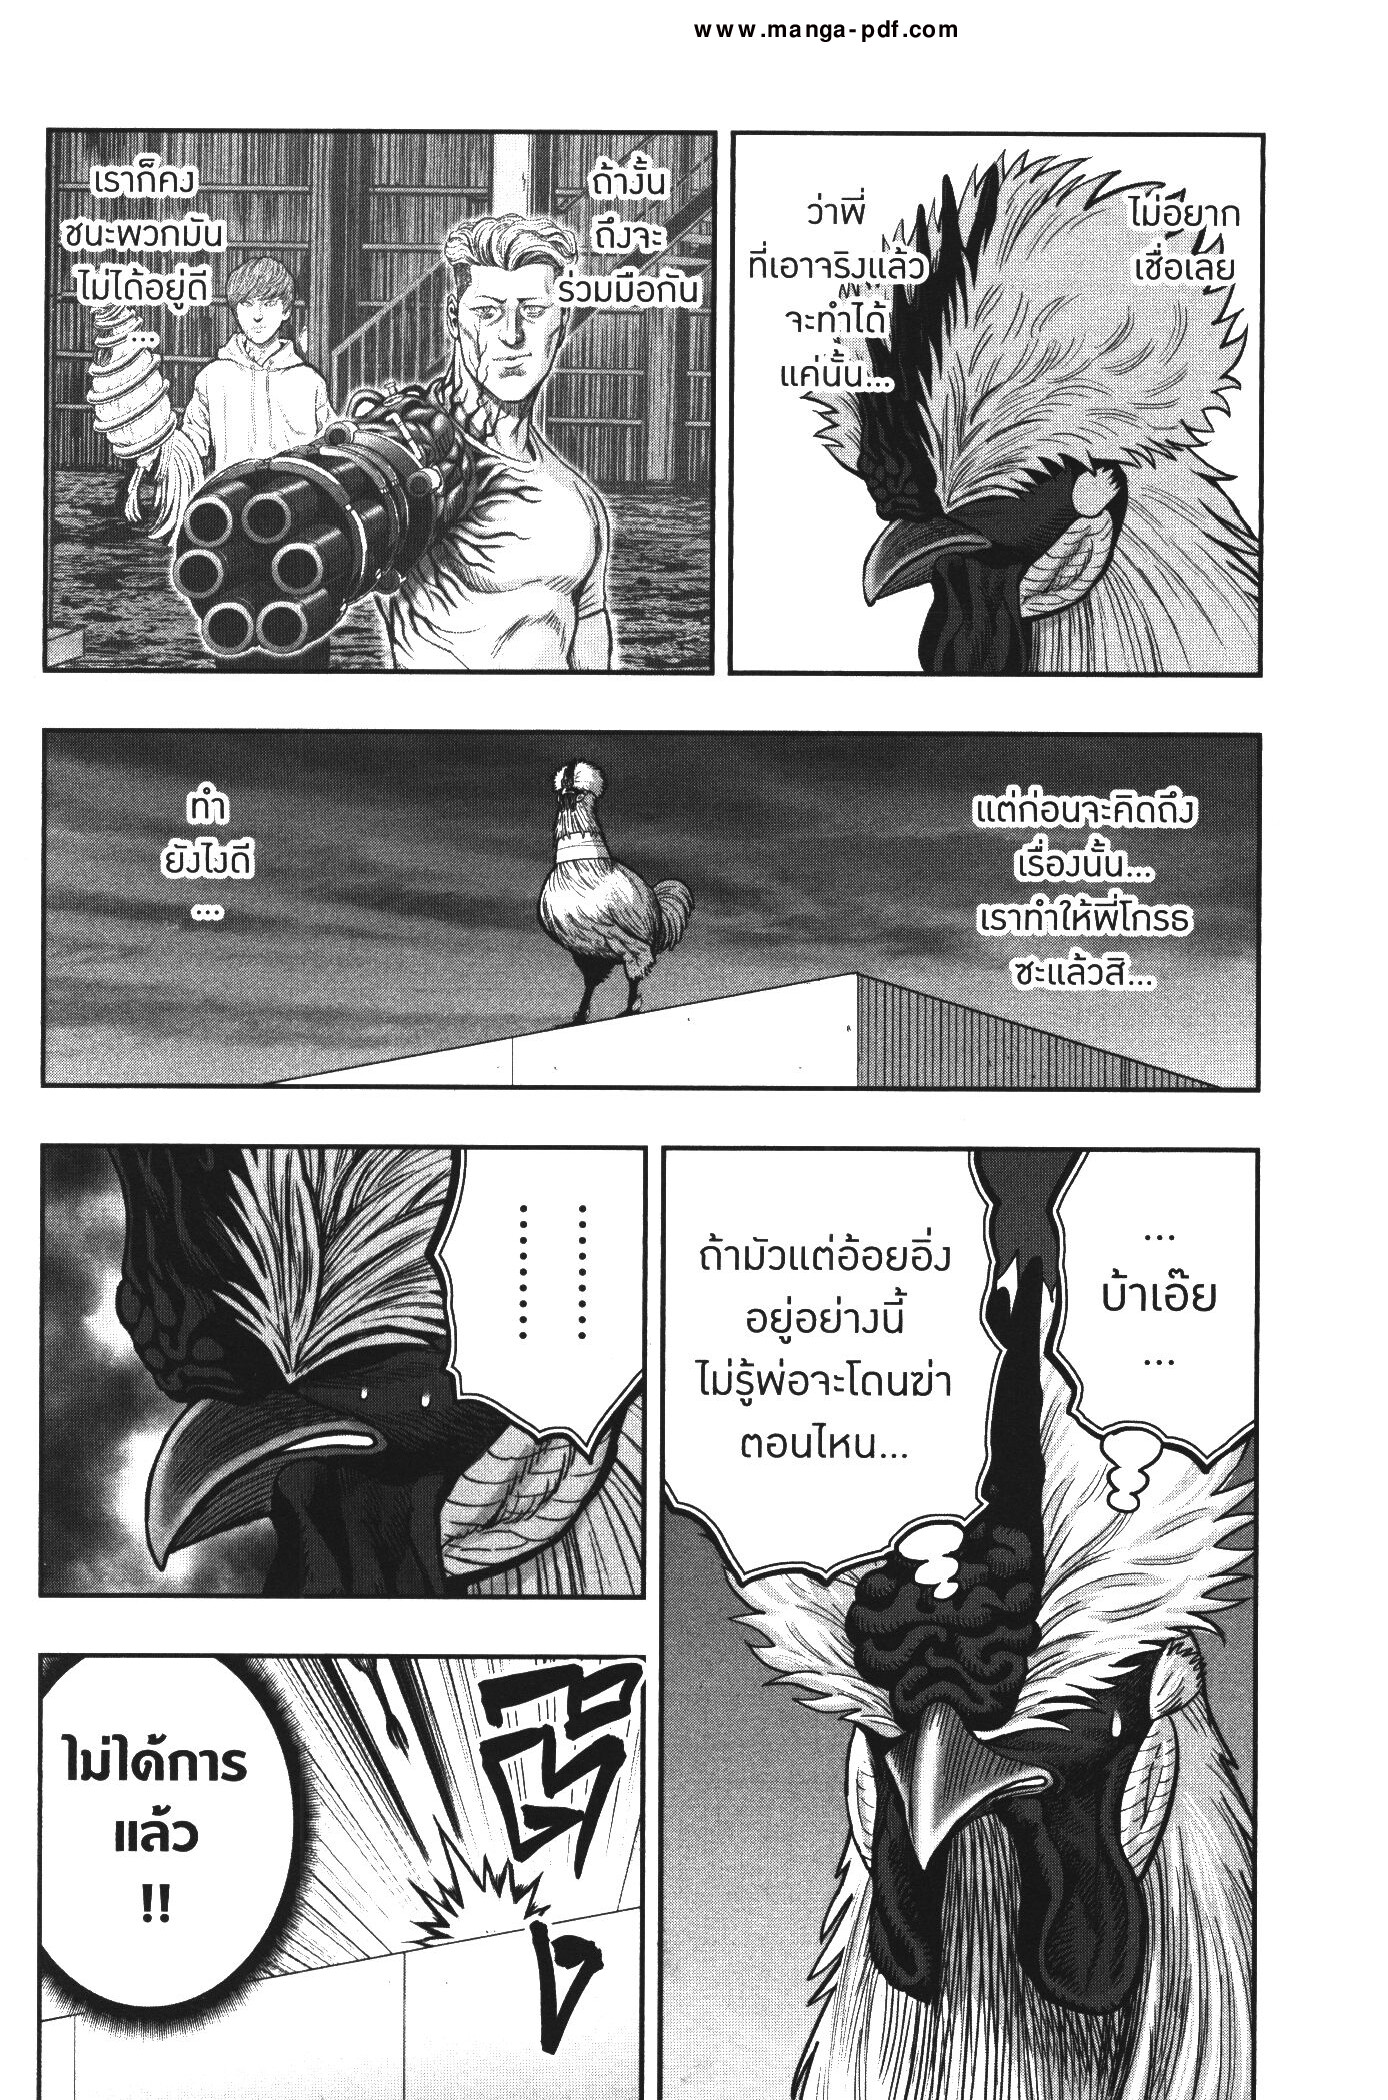 Rooster Fighter 20 (4)